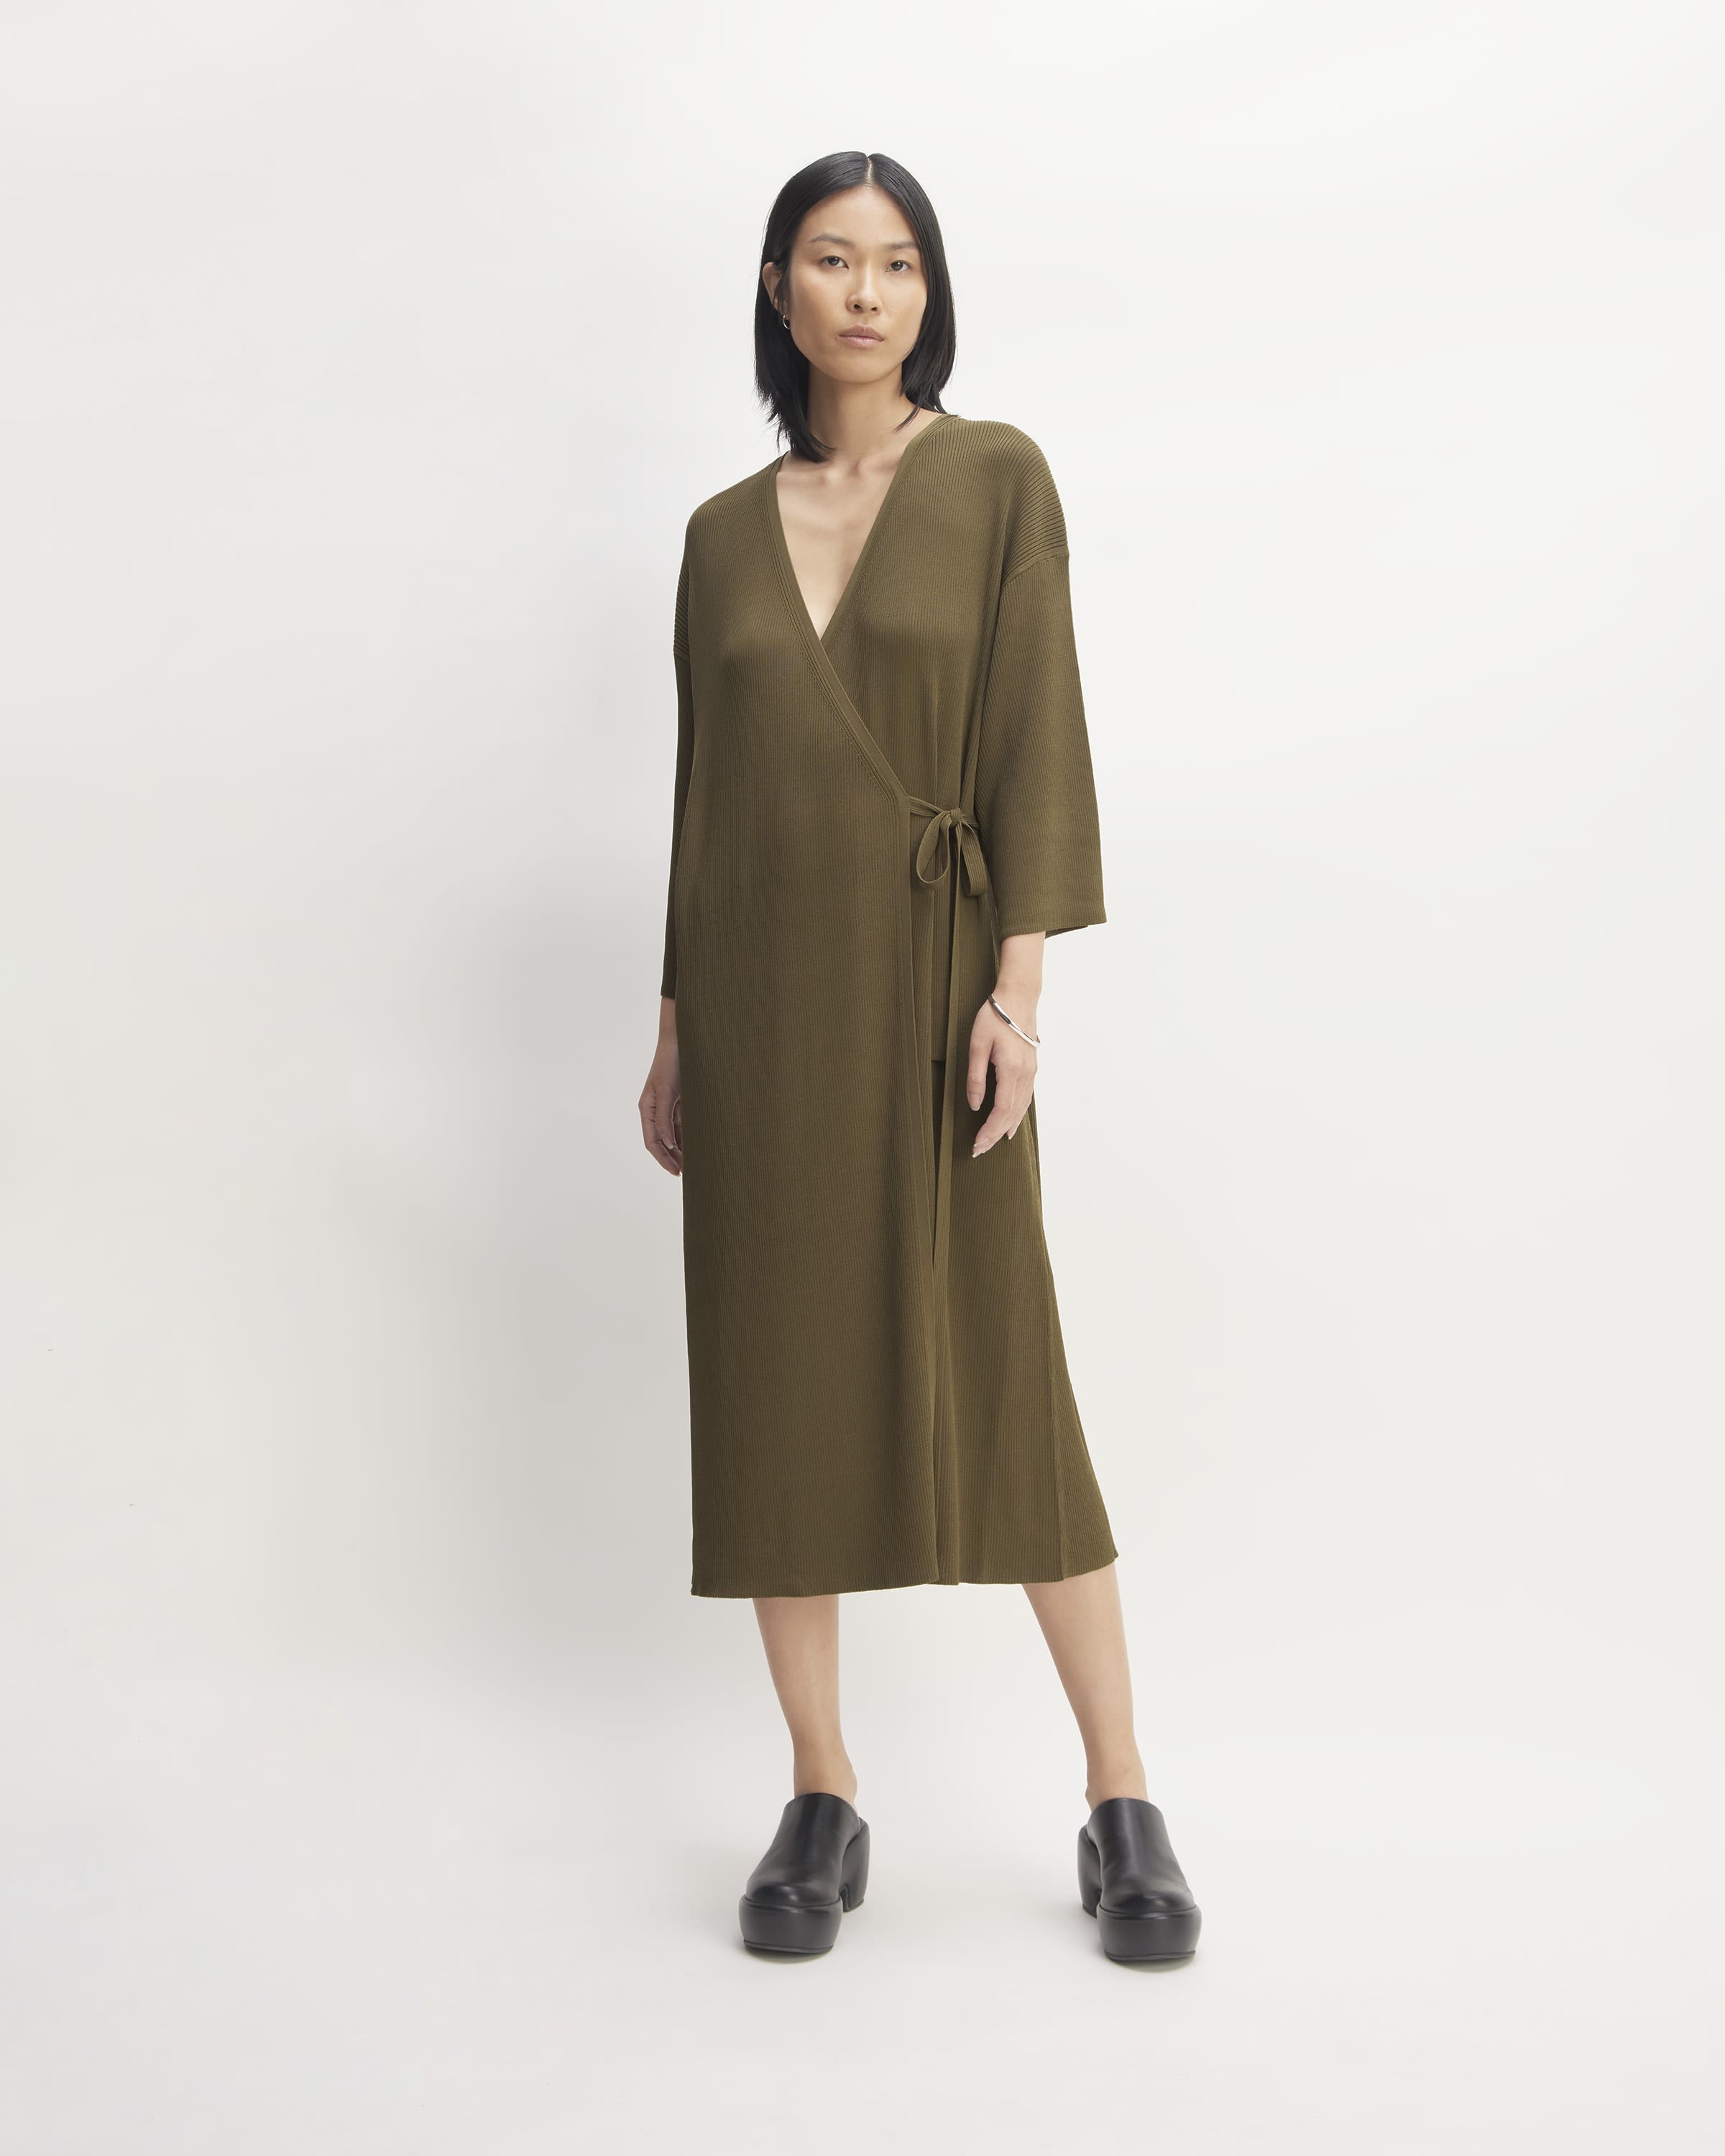 The Everlane Wrap Dress Review, Something Good